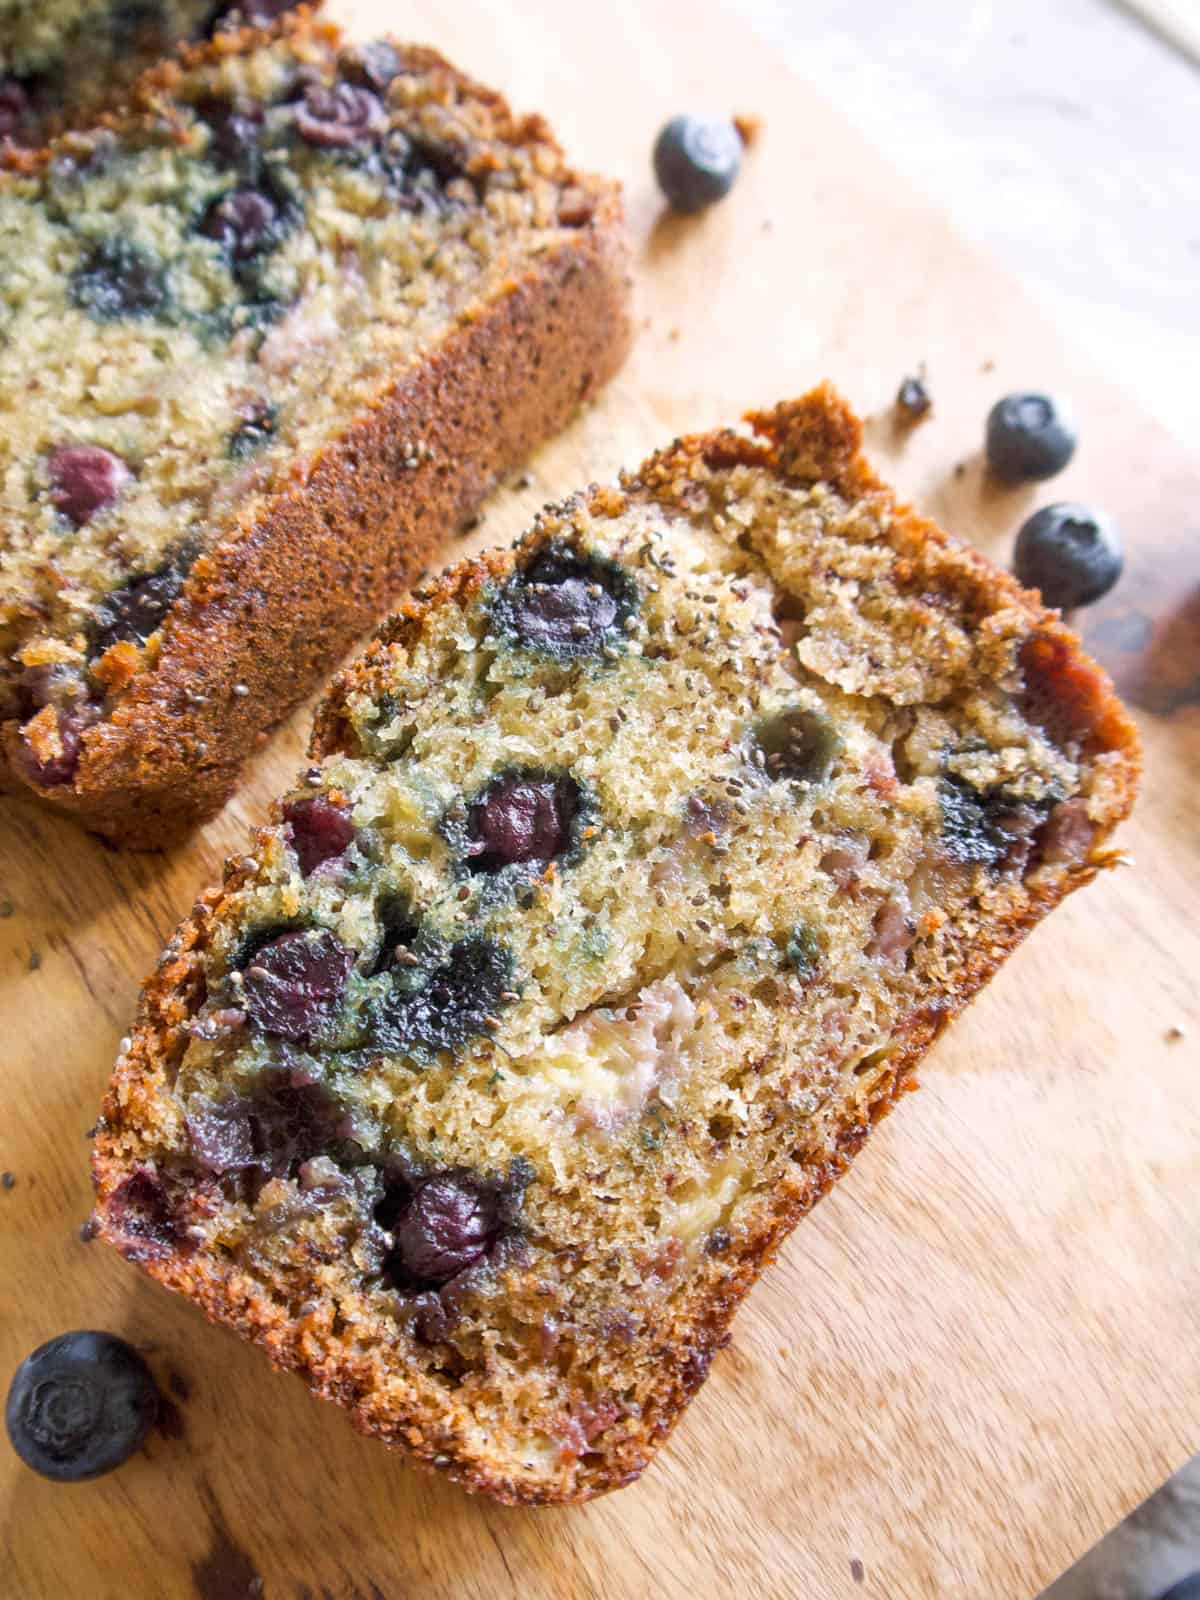 One slice of healthy banana blueberry bread on a table.